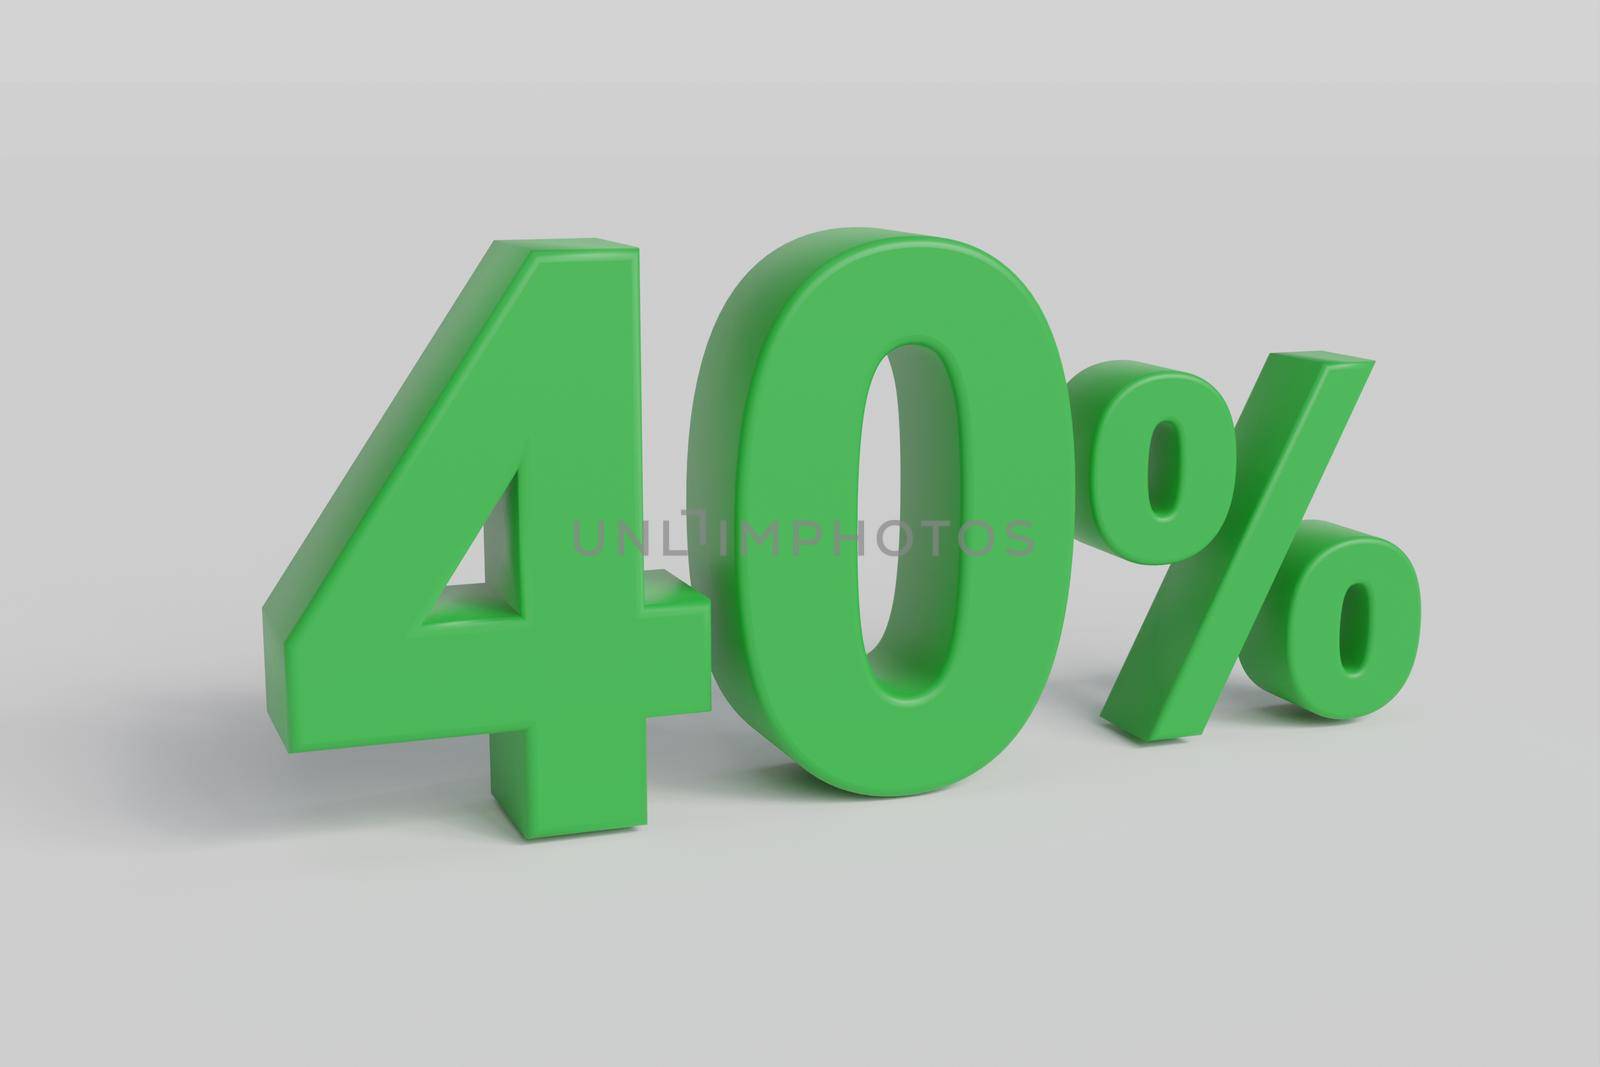 40% off on sale. Fourty percent 3D render green font isolated over white background with shadow and reflection. Clipping path included.